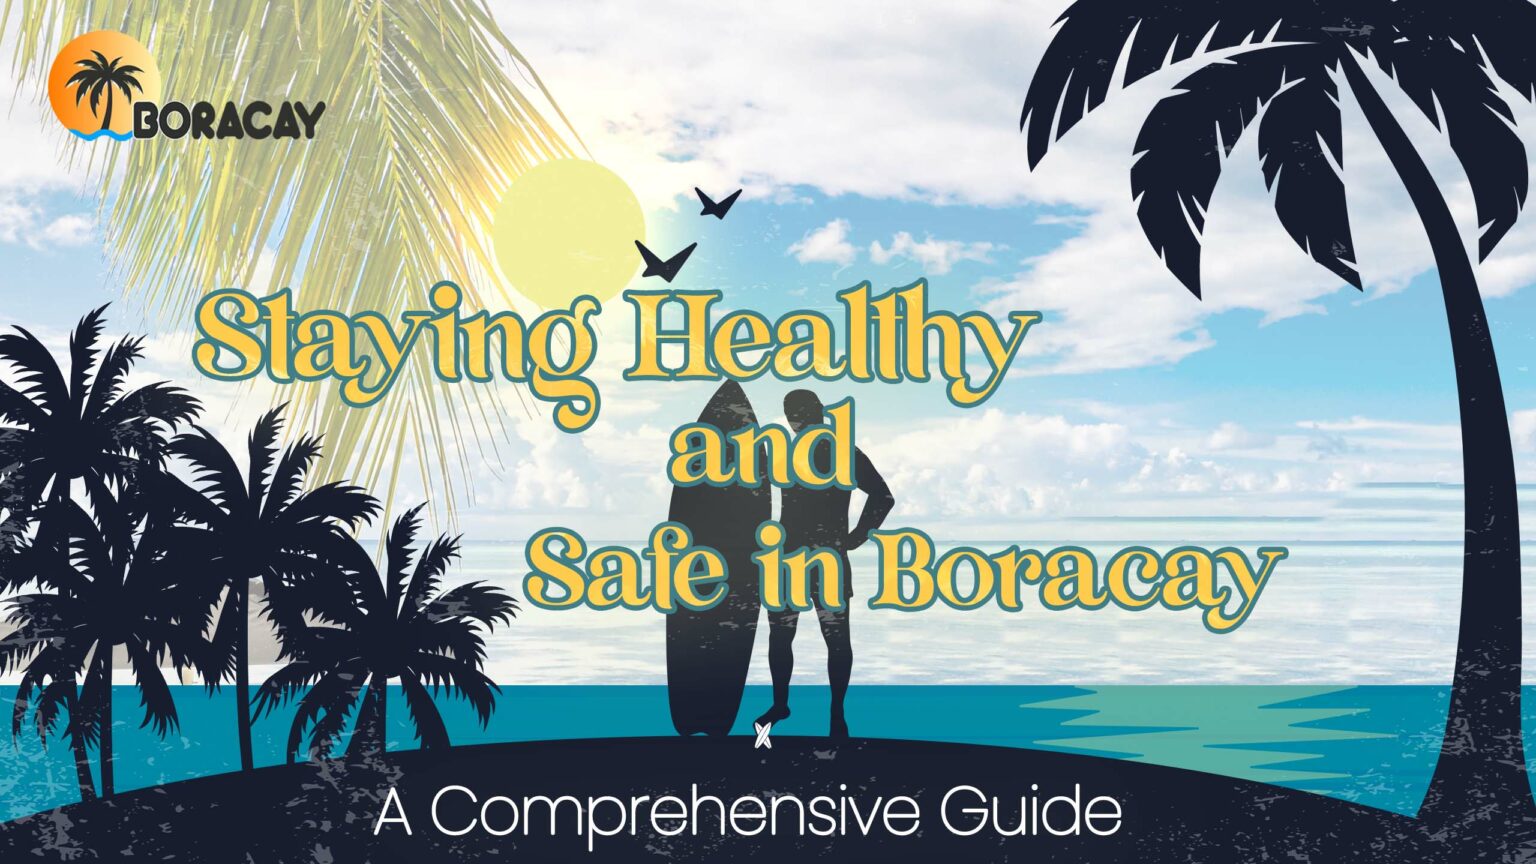 Staying Healthy and Safe in Boracay